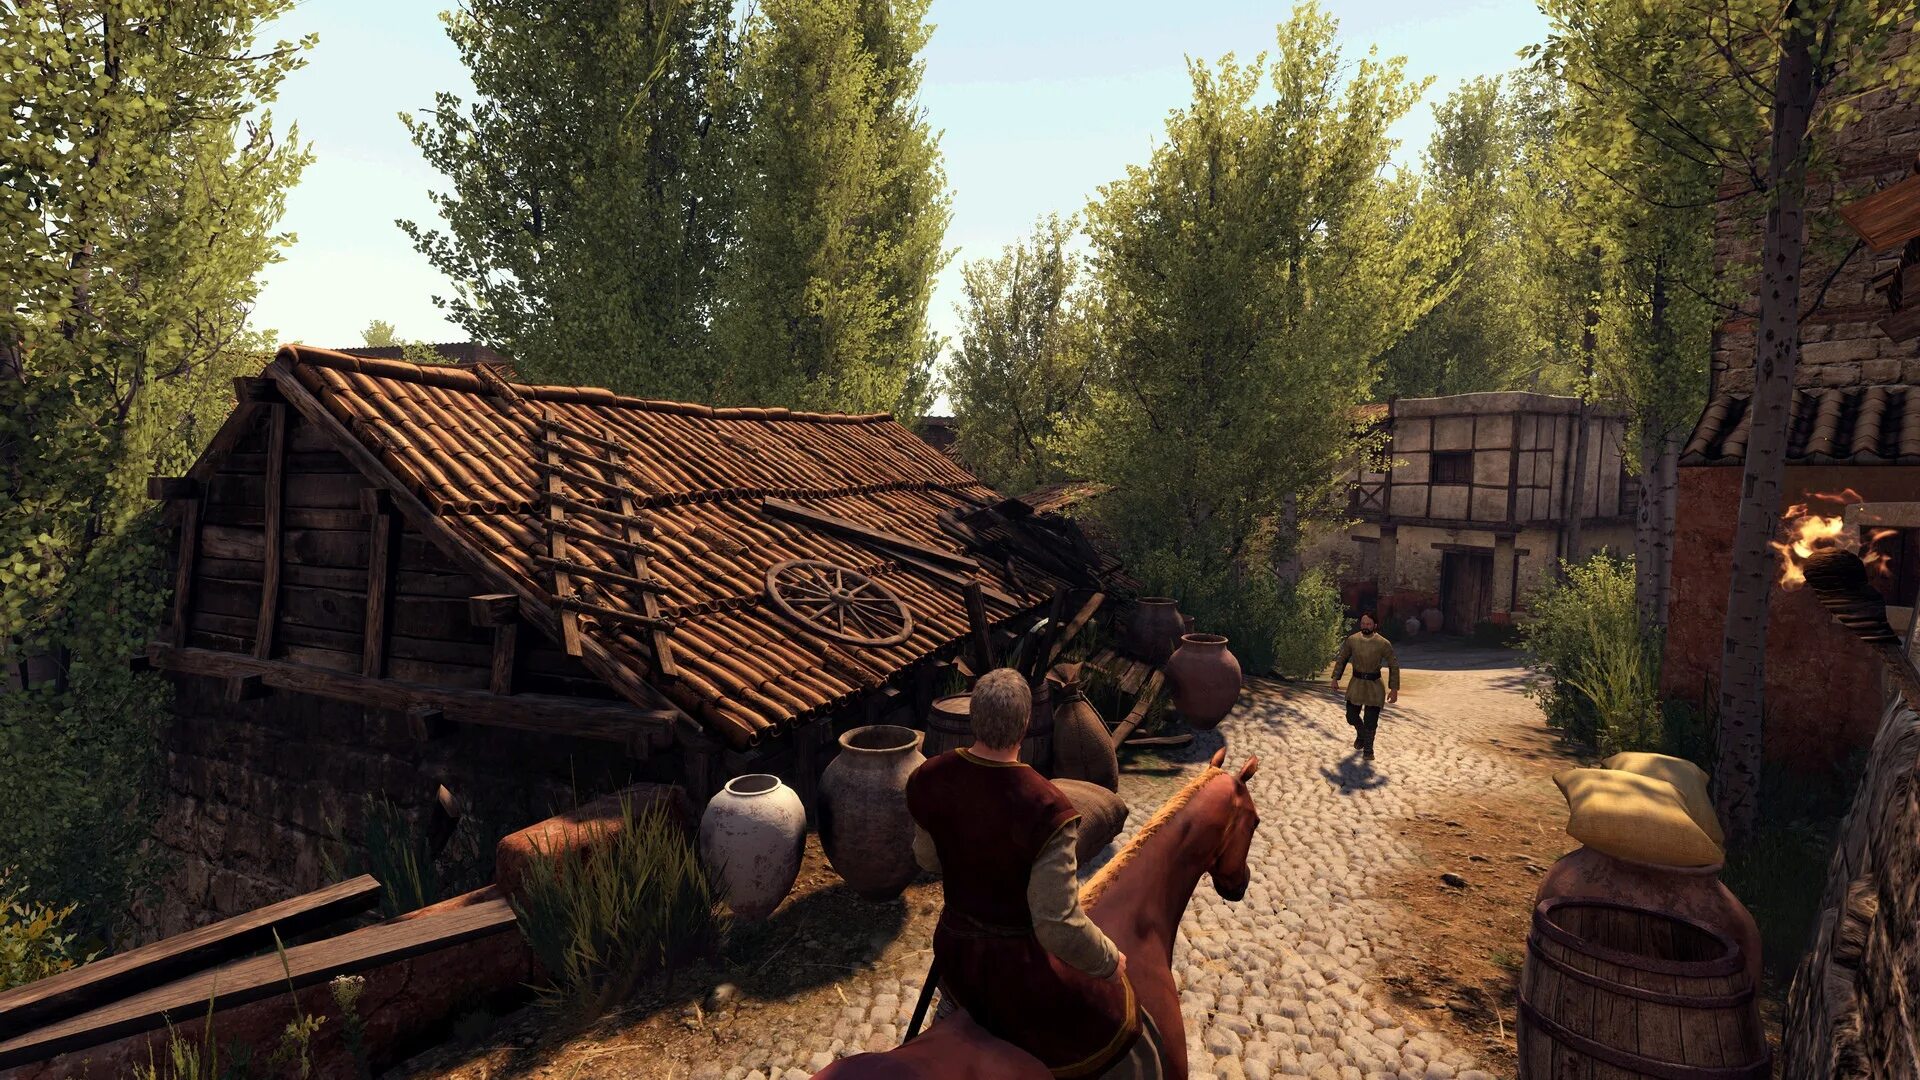 Mount and Blade 2 Bannerlord. Mountain Blade 2 Bannerlord. Mount and Blade 2 Bannerlord screenshot. Mounted Blade 2 Bannerlord.